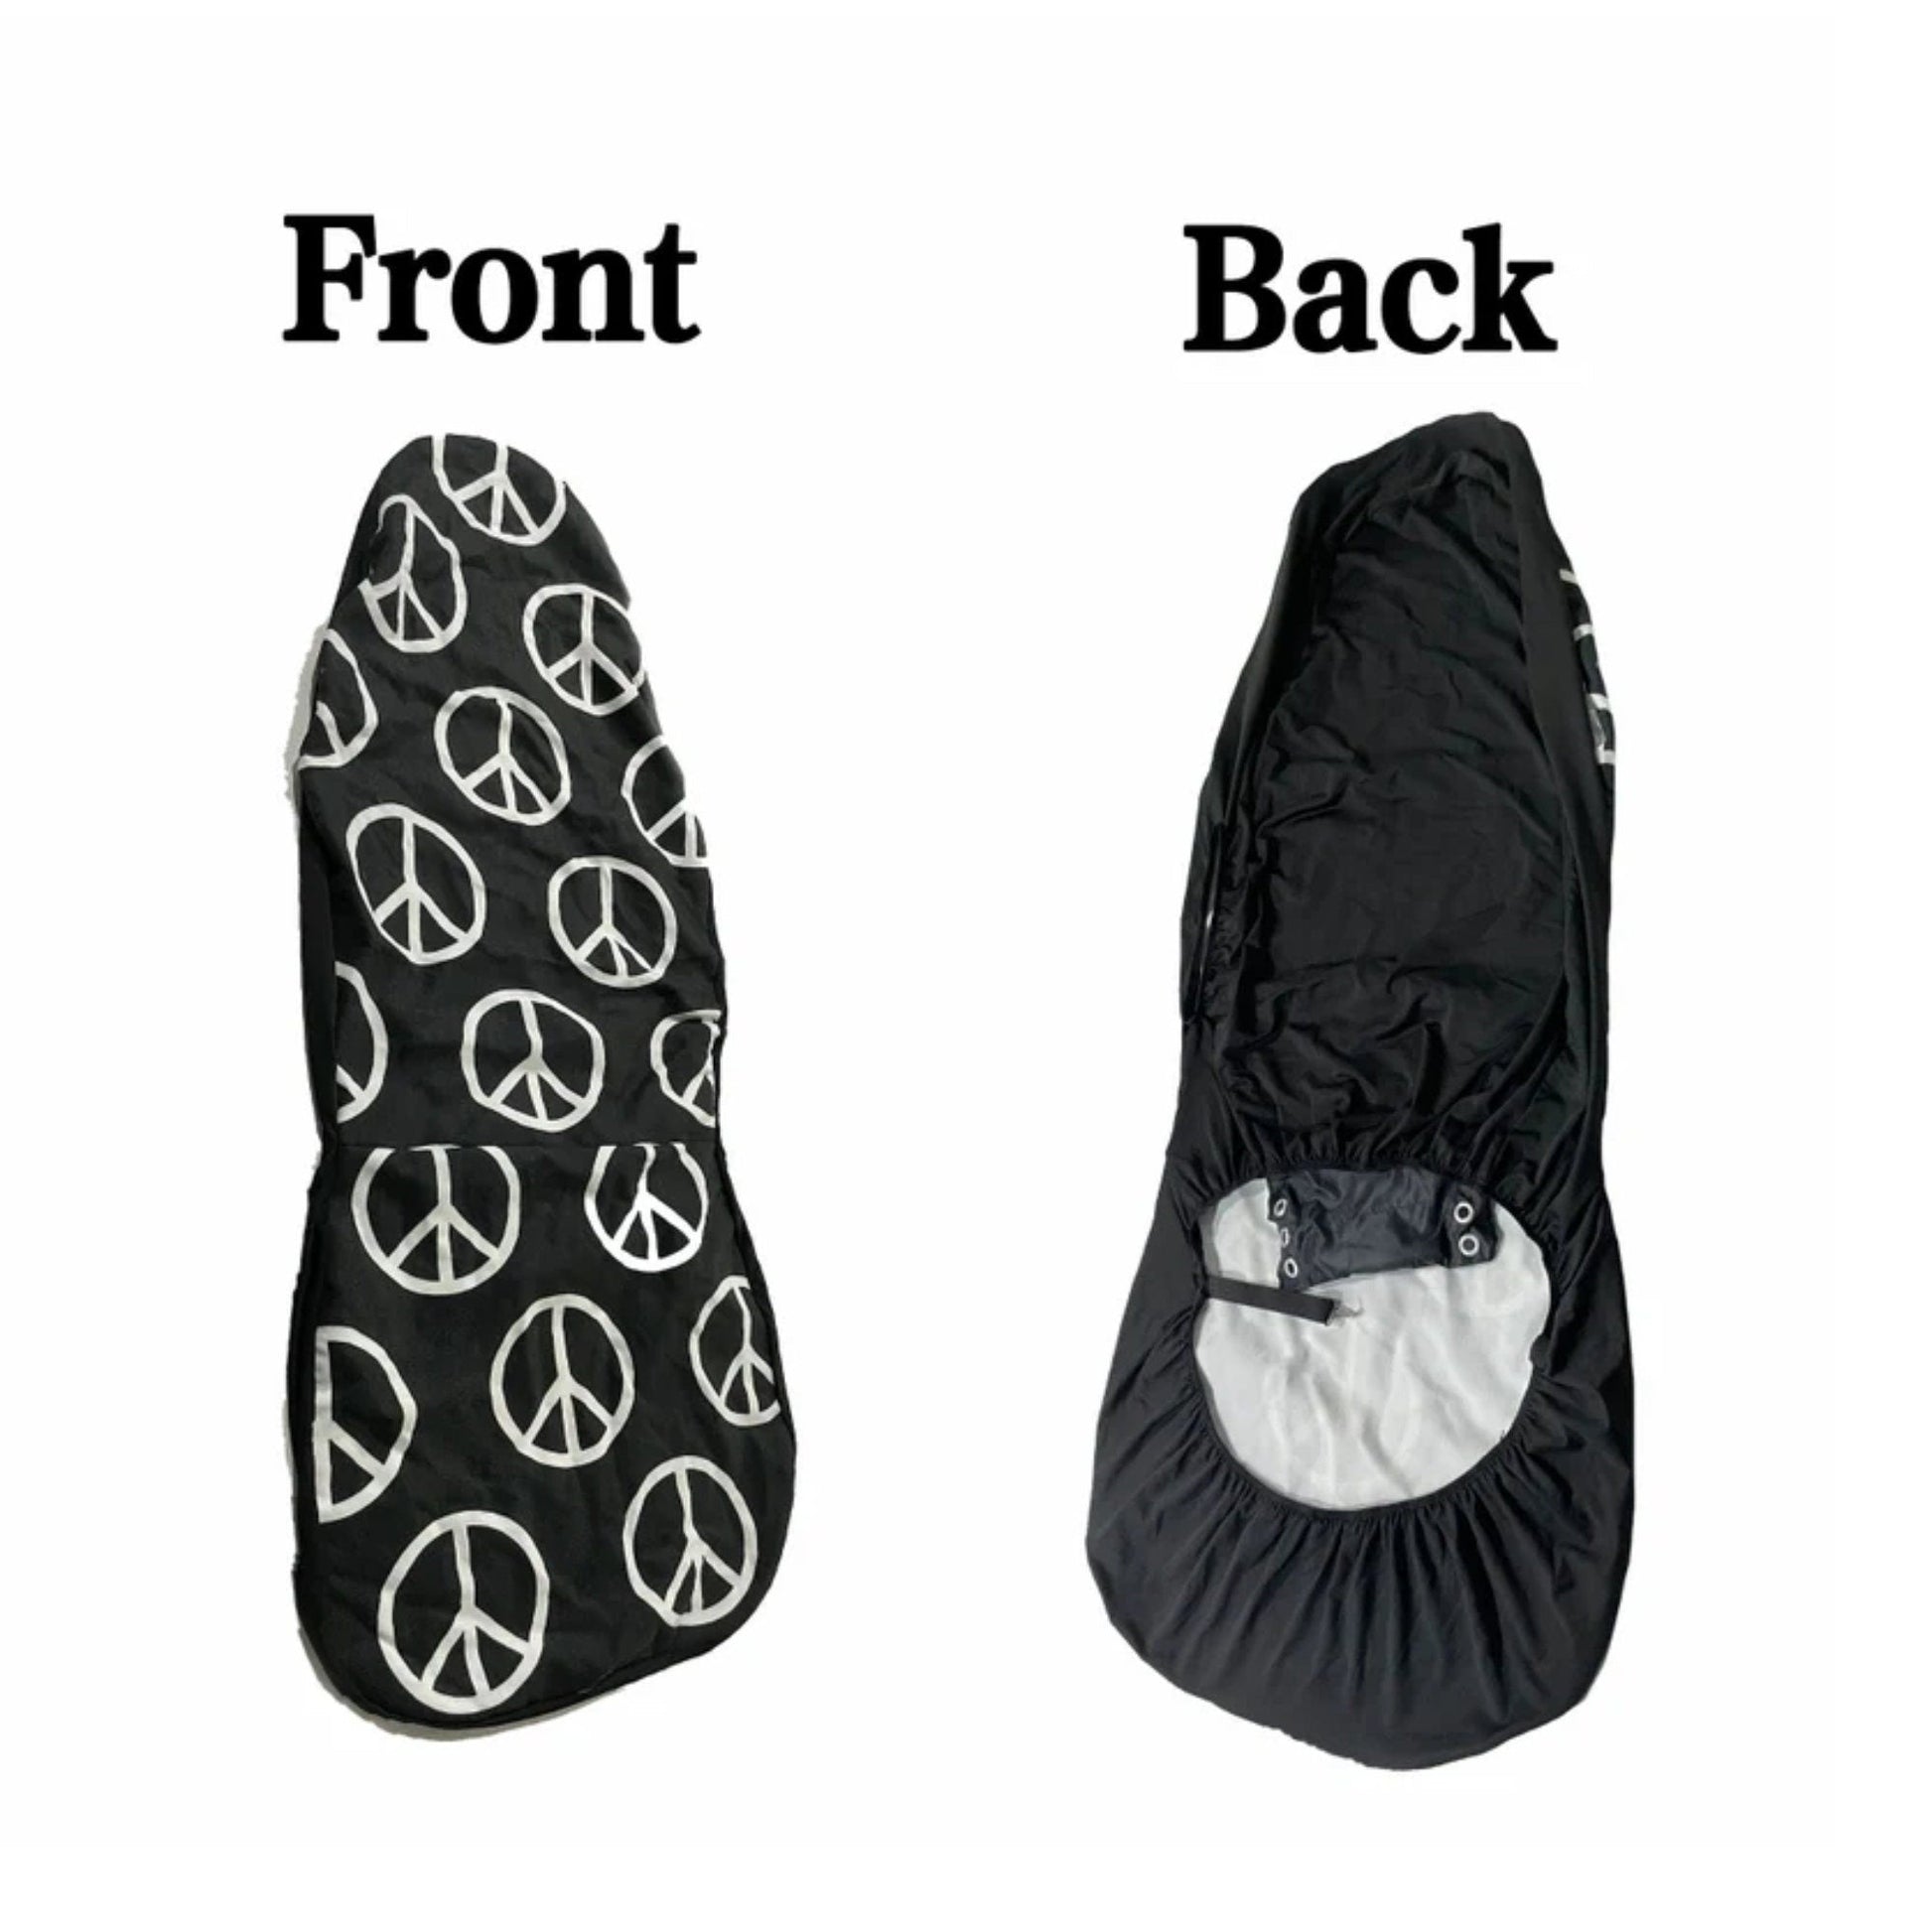 Car Seat Covers, Celestial Cute Car Accessories for Women, Snake